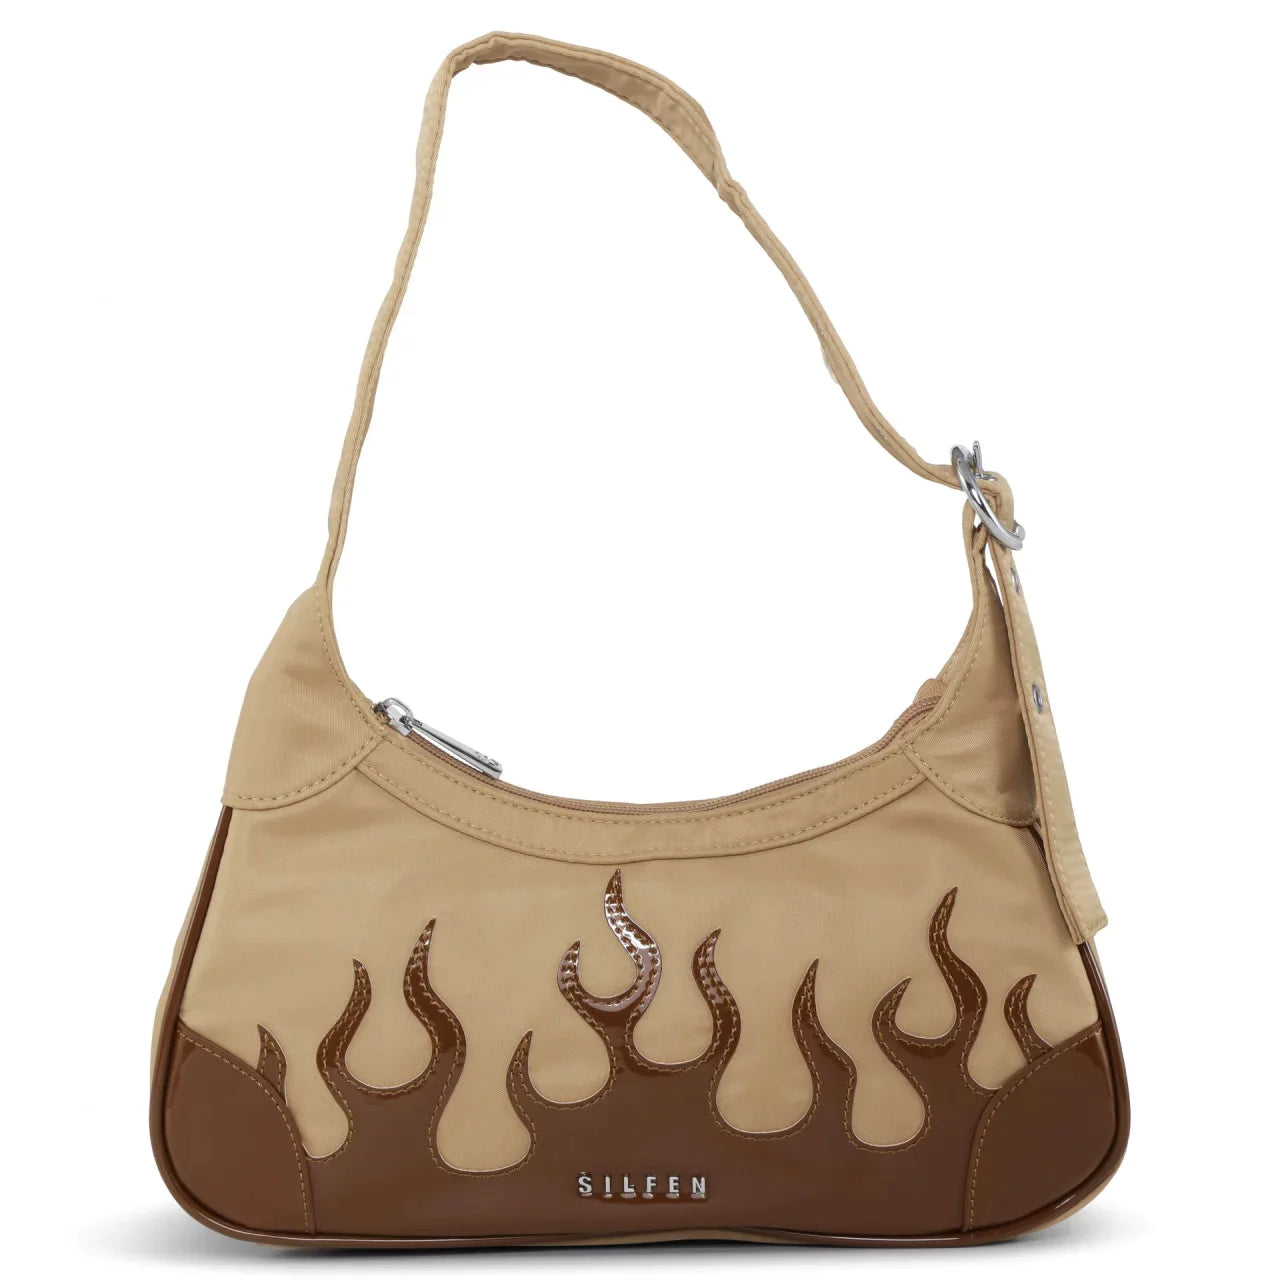 THORA SHOULDER BAG - MOCCA FLAME - EXCLUSIVE Bags from SILFEN - Just €80! SHOP NOW AT IAMINHATELOVE BOTH IN STORE FOR CYPRUS AND ONLINE WORLDWIDE @ IAMINHATELOVE.COM